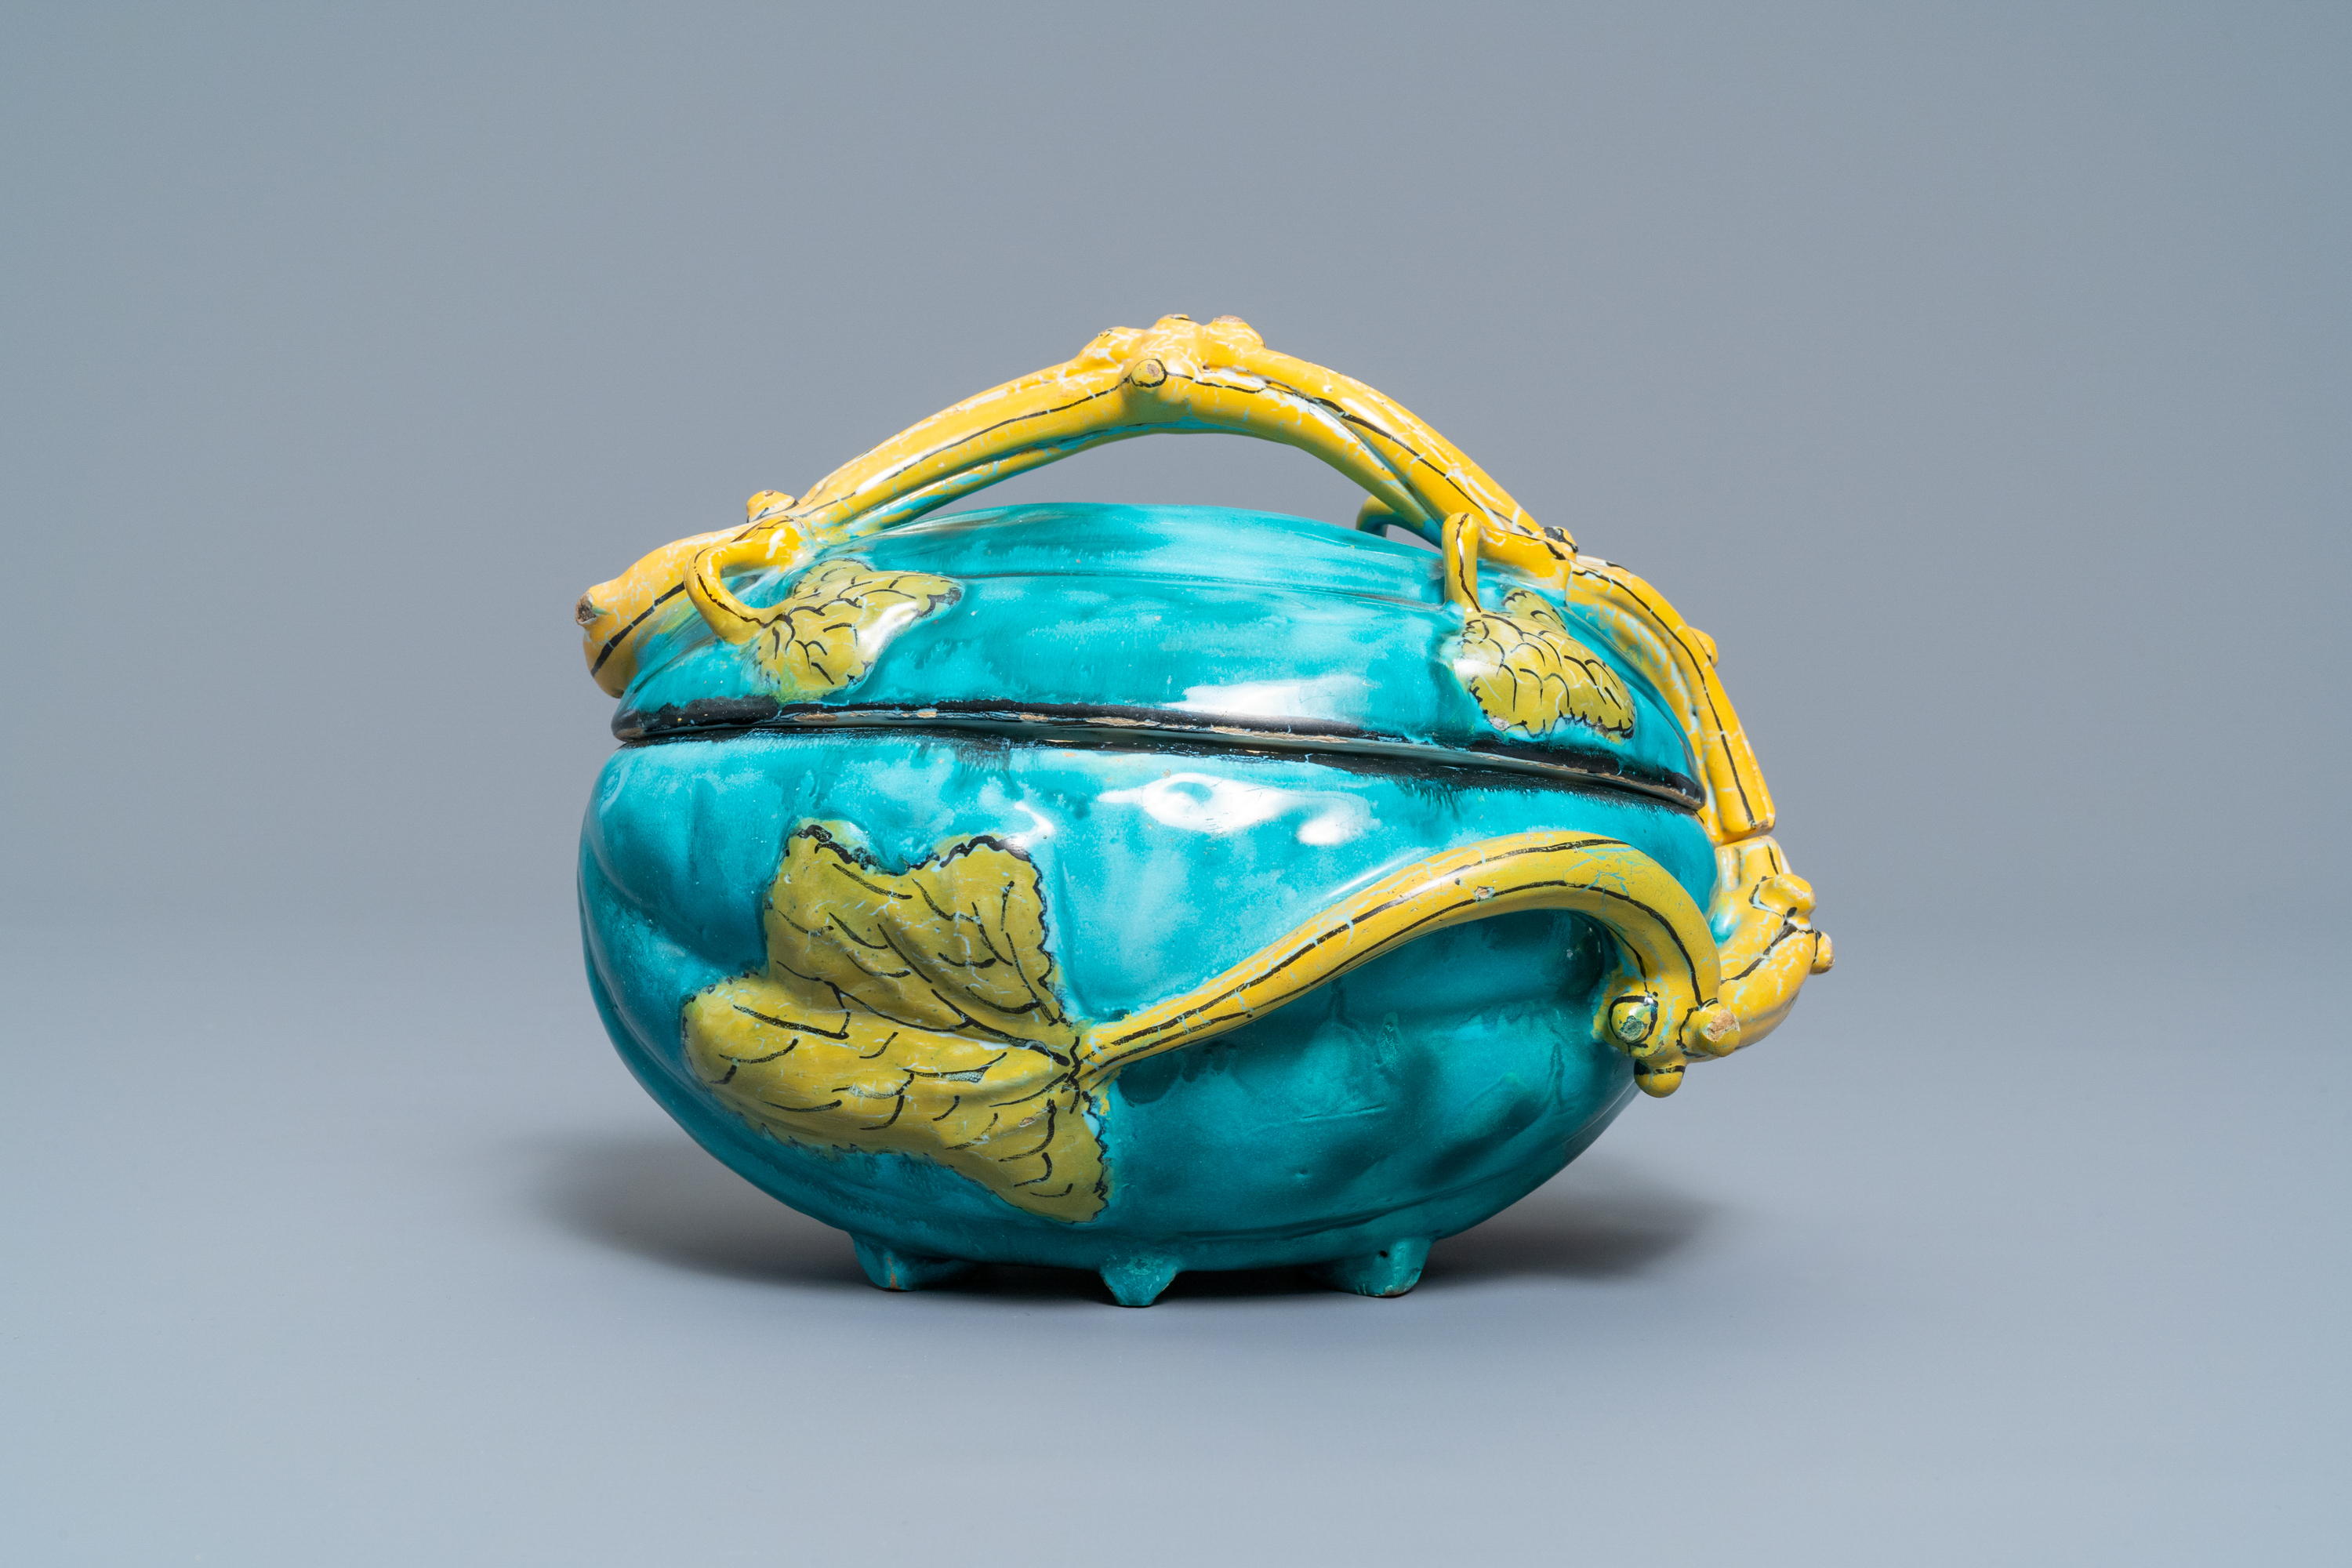 A polychrome Brussels faience melon-shaped tureen and cover, 18th C. - Image 2 of 7